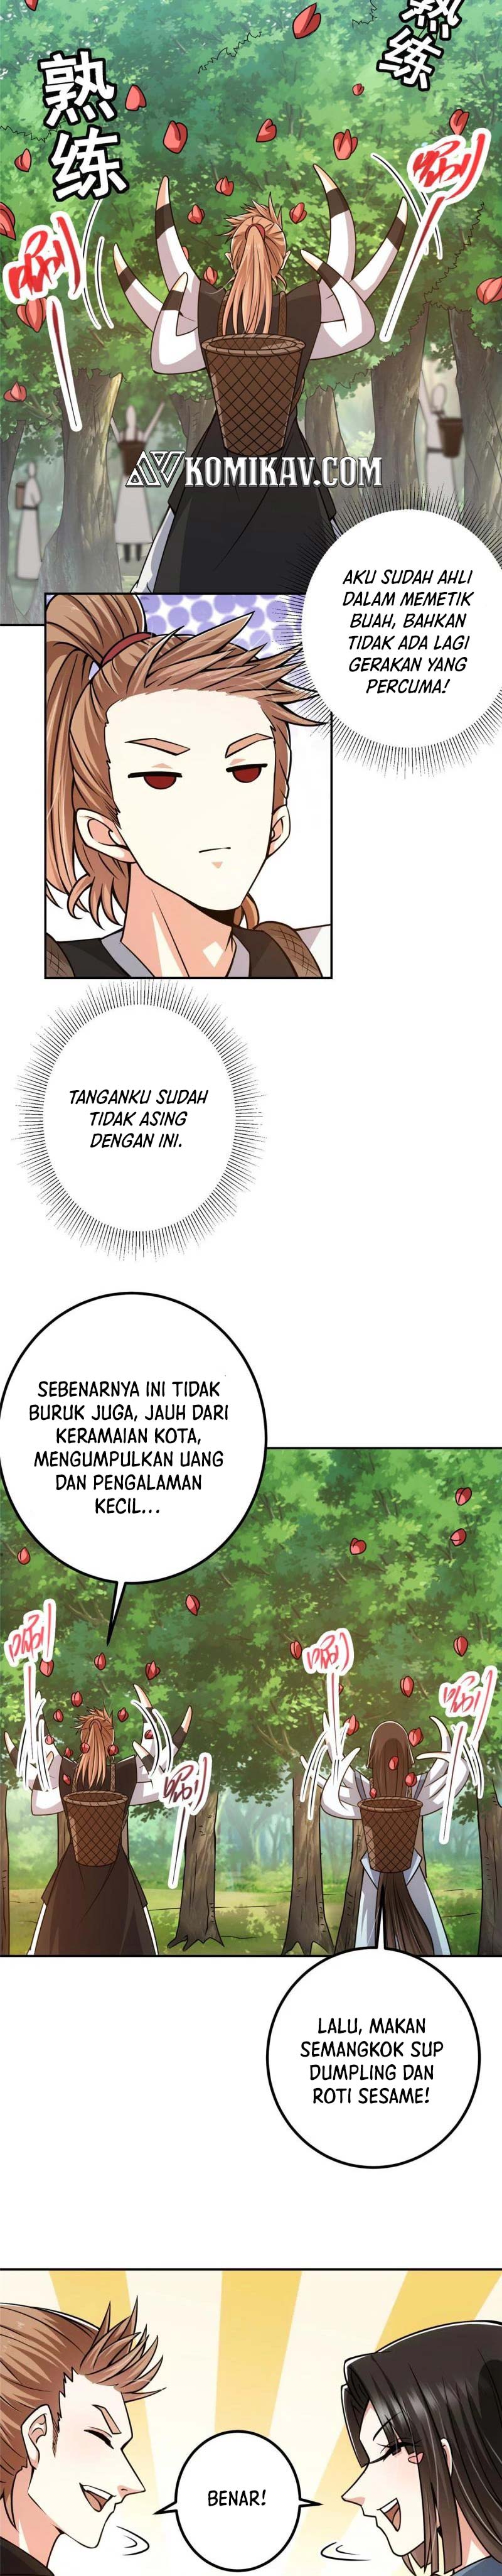 Keep A Low Profile, Sect Leader Chapter 115 Bahasa Indonesia